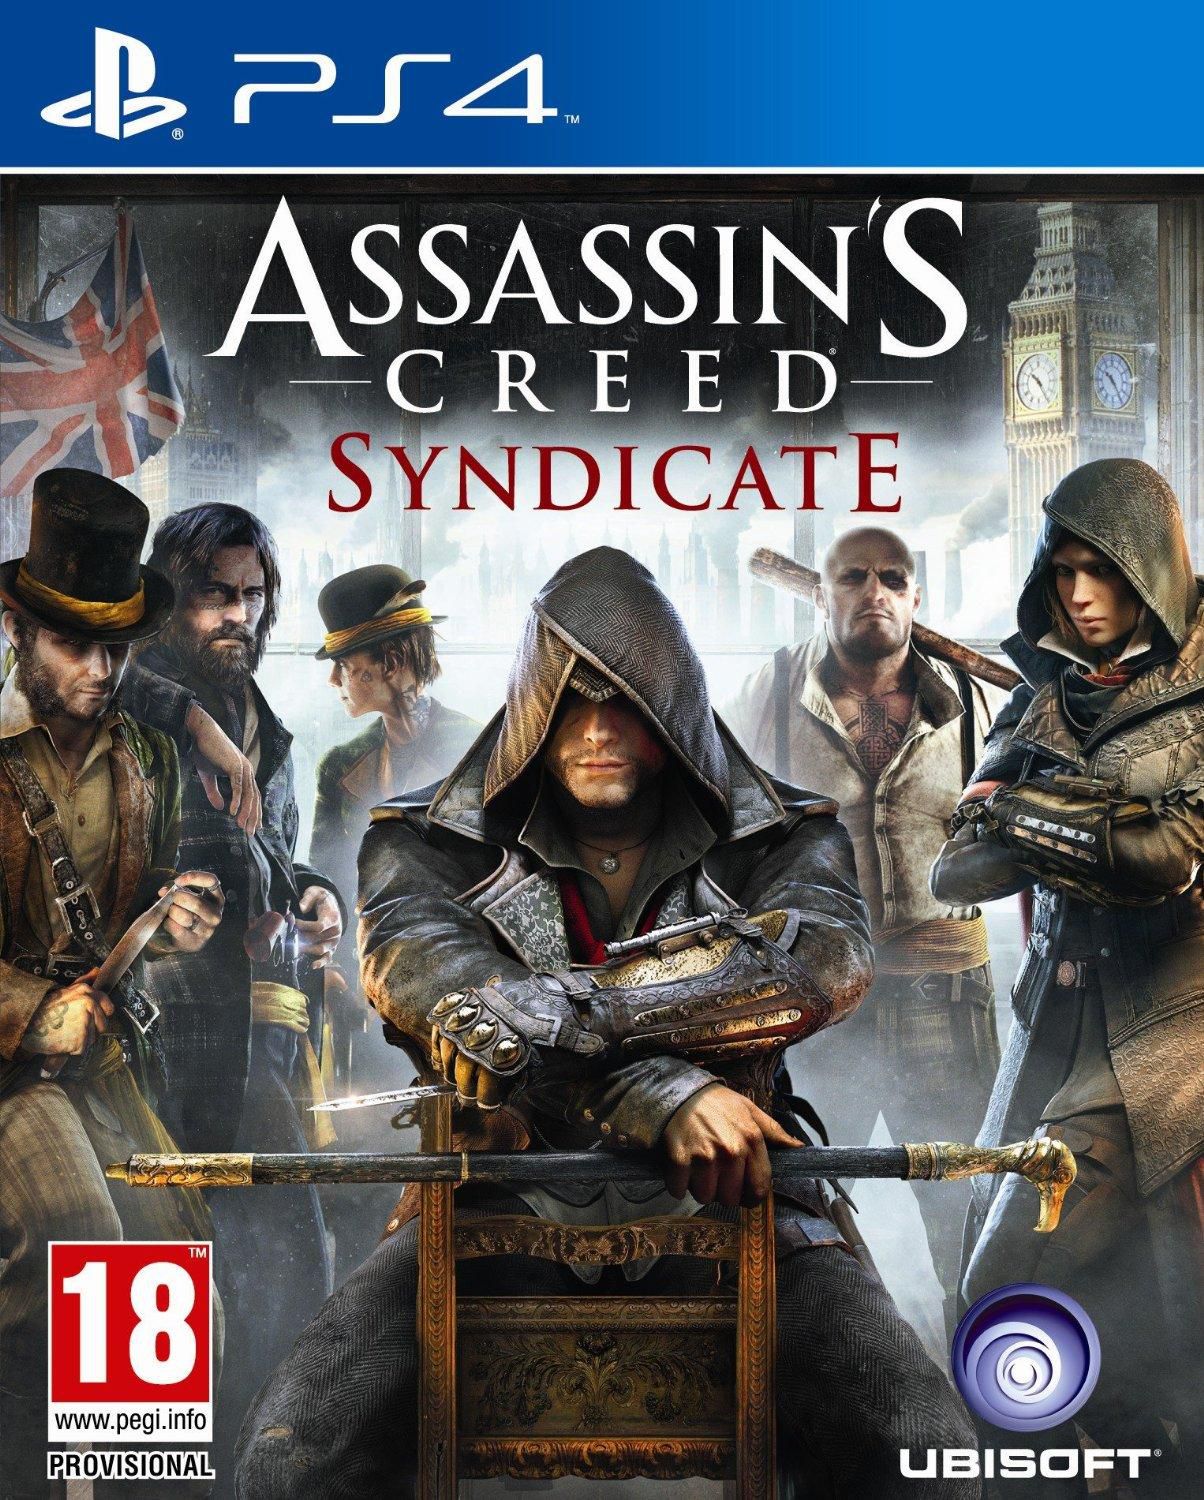 Assassin's Creed Syndicate for PlayStation 4